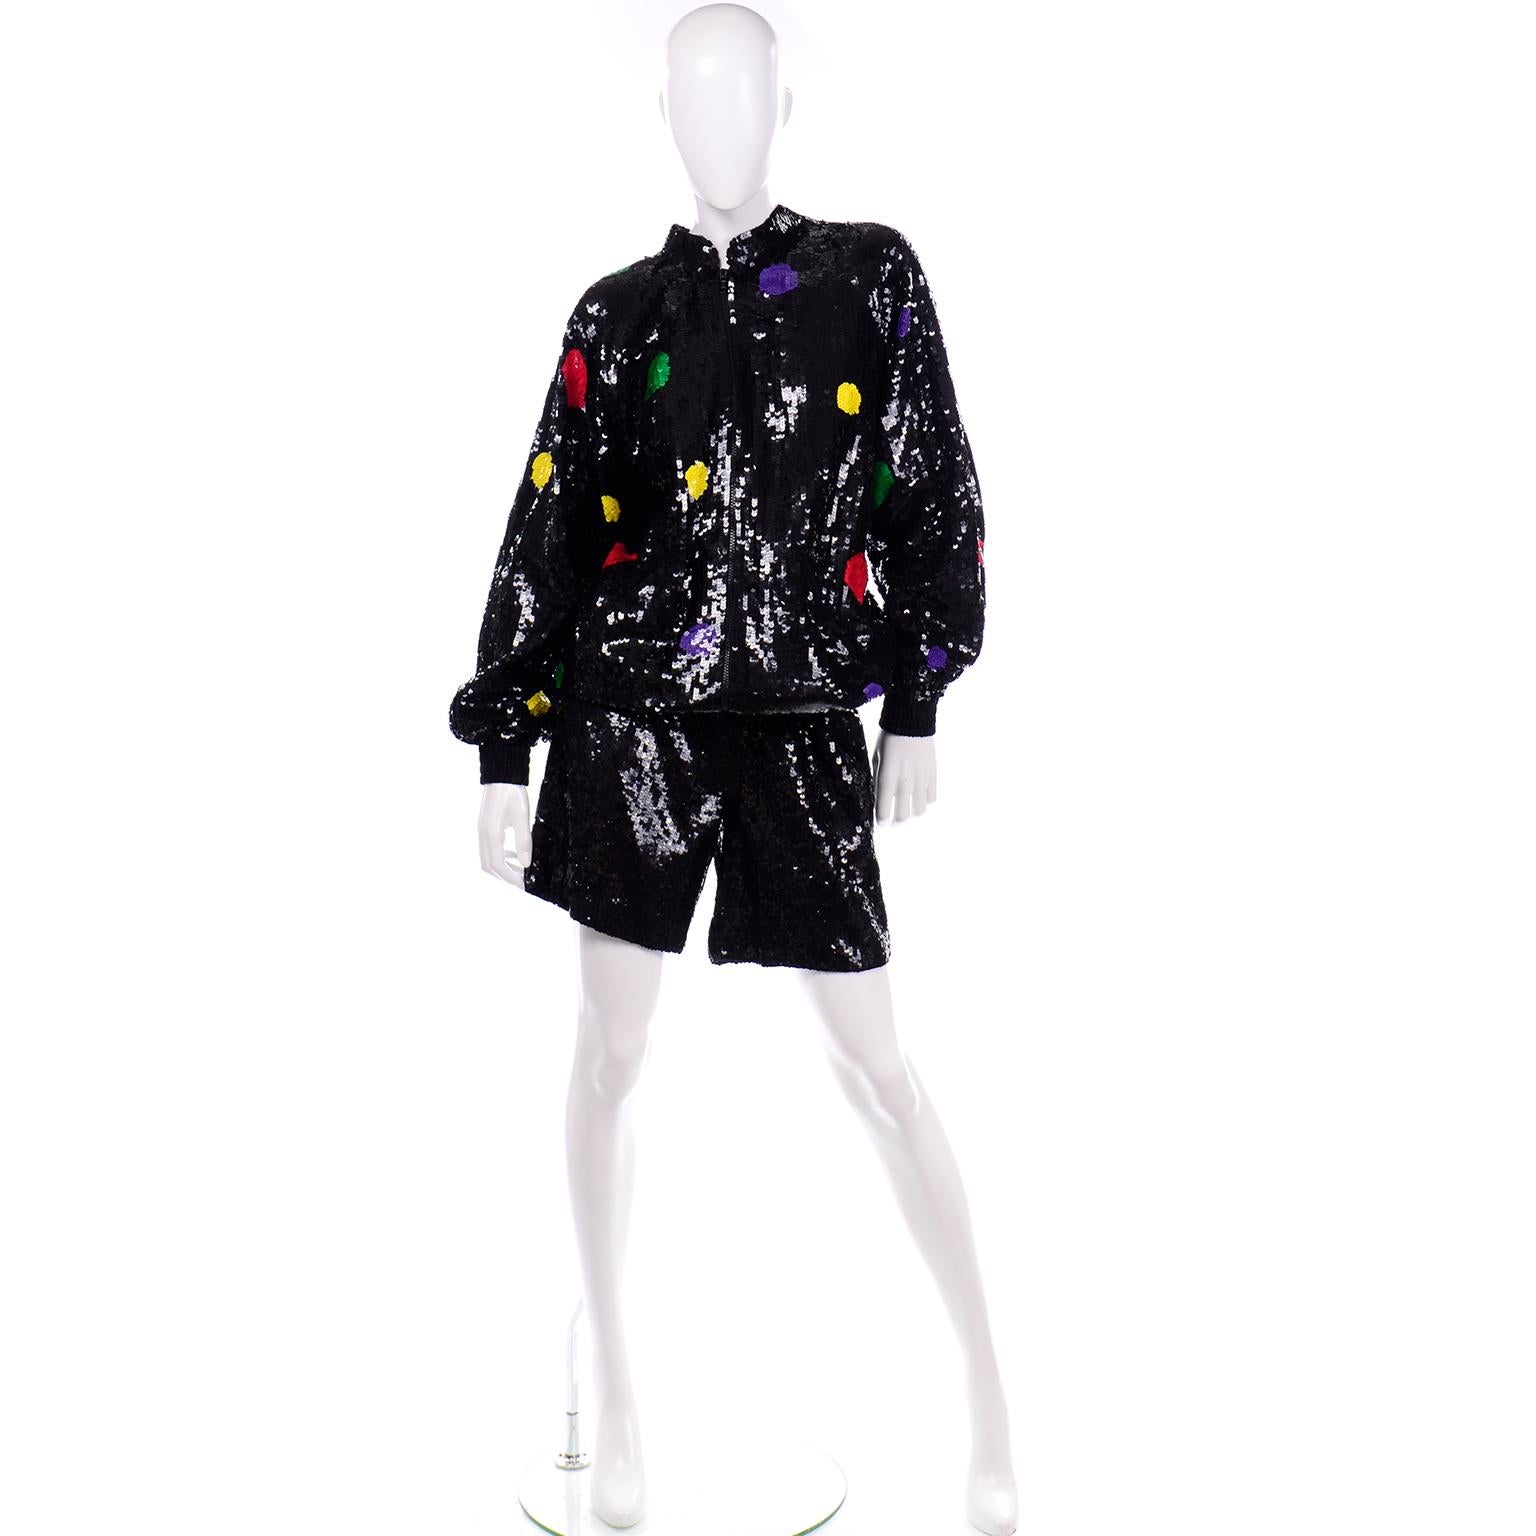 We have two sets of this amazing vintage Lillie Rubin silk sequin short sets. The base color is black and the sequin polka dots are in bold shades of  yellow, green, red, and purple. The sets are fully lined in black silk. The zip front sweatshirt